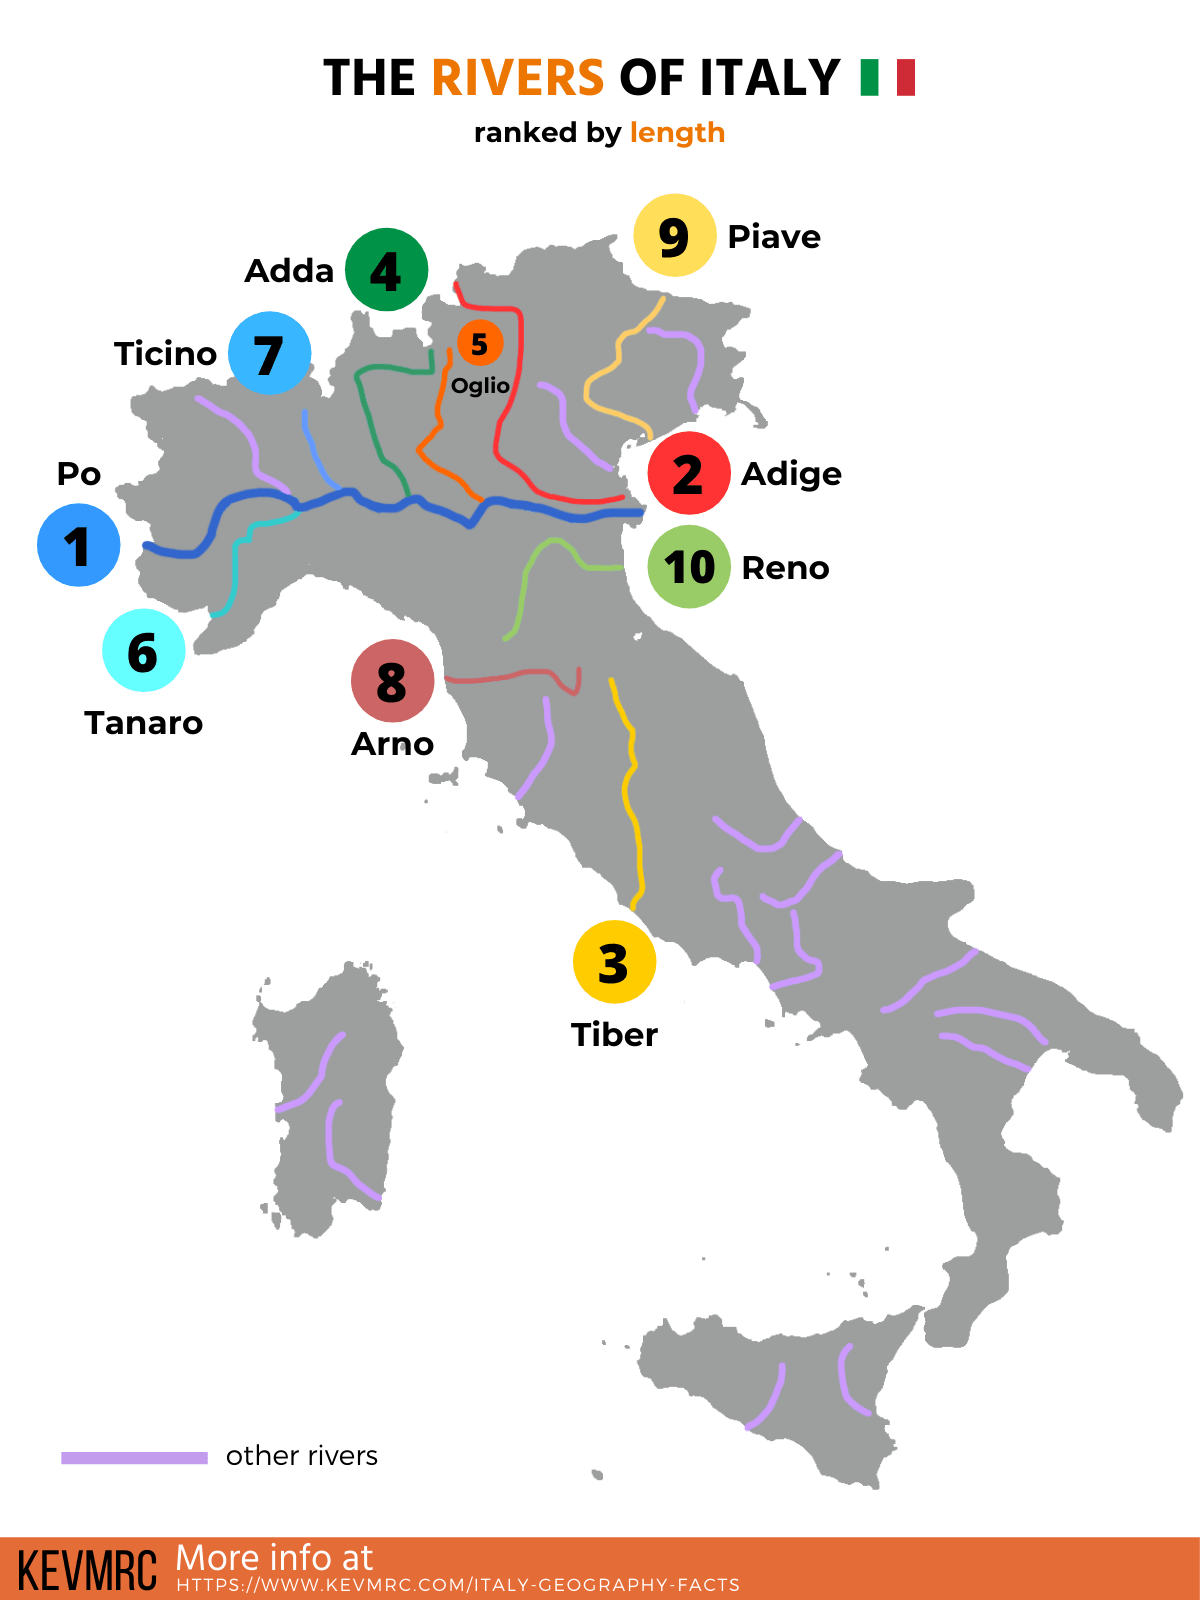 illustration about the italian rivers